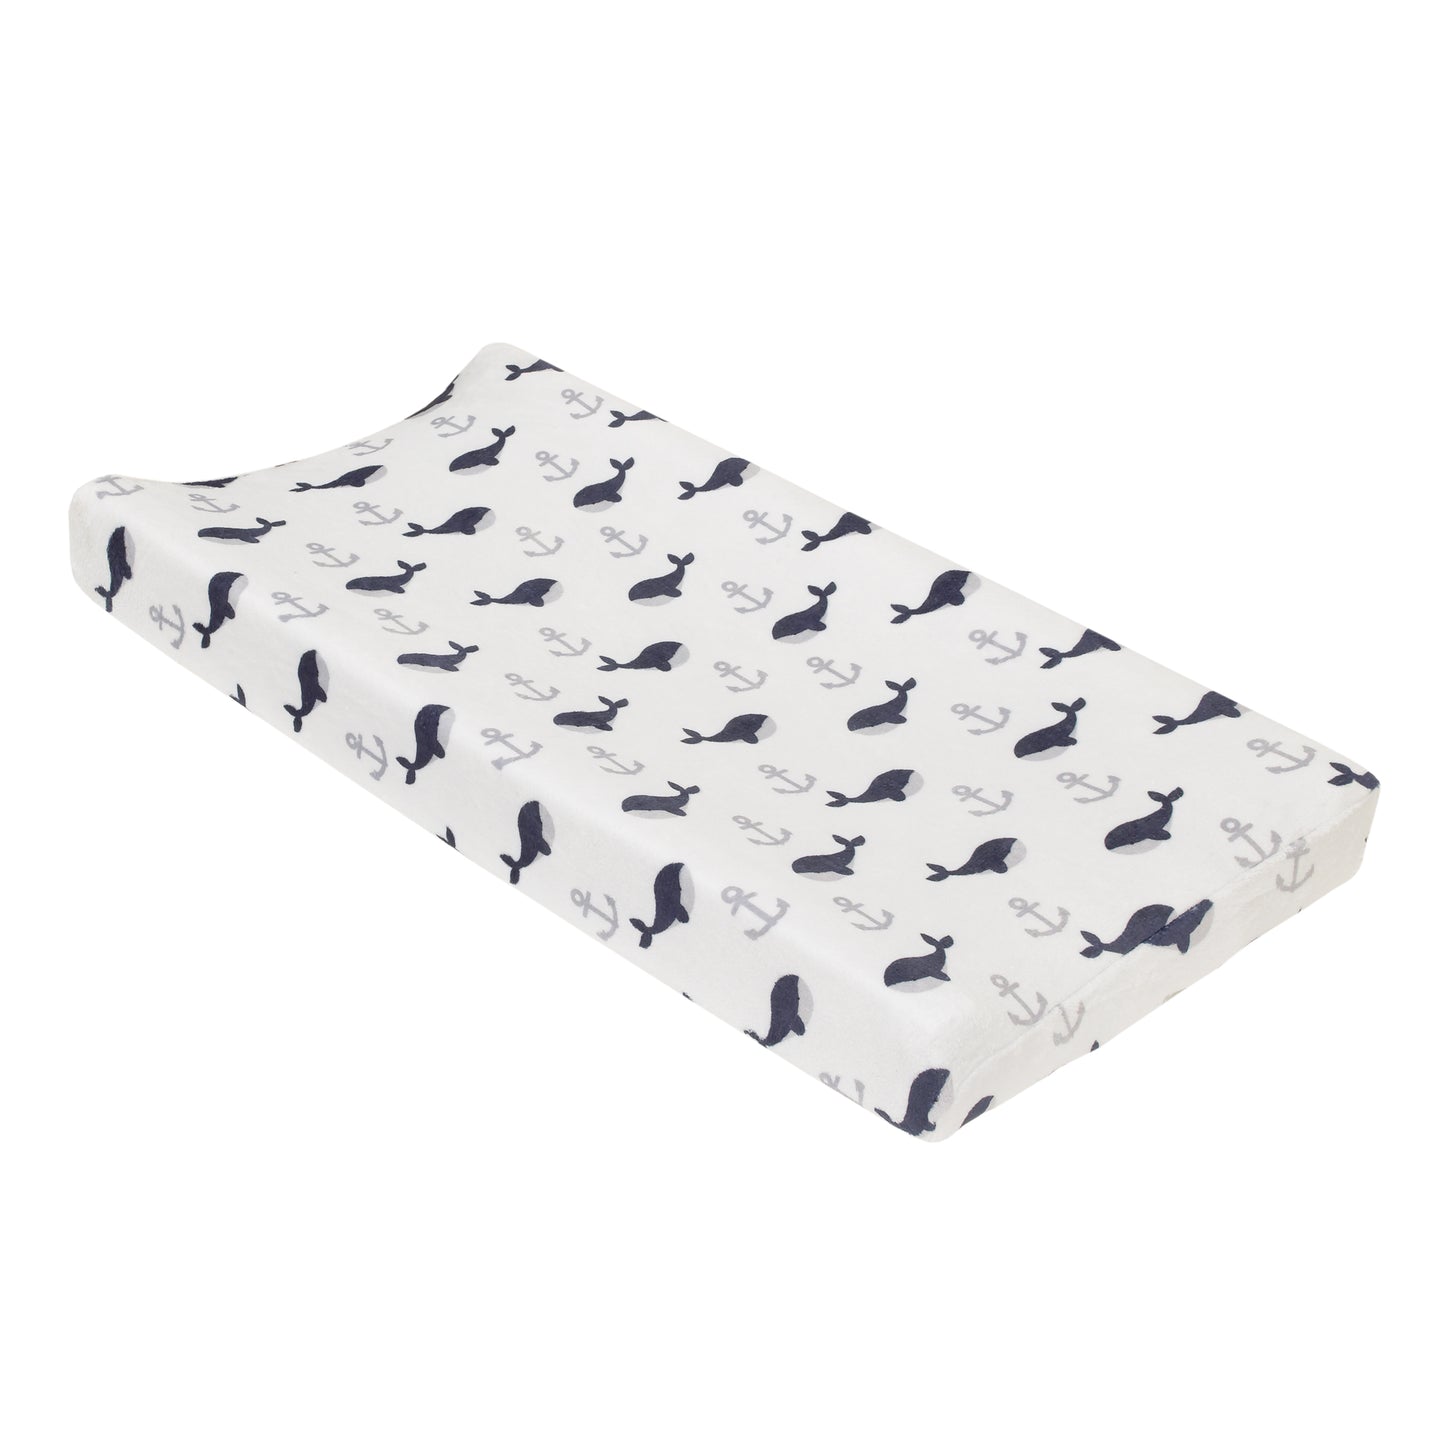 NoJo Nantucket Adventure Super Soft White and Blue Whale and Anchor Changing Pad Cover